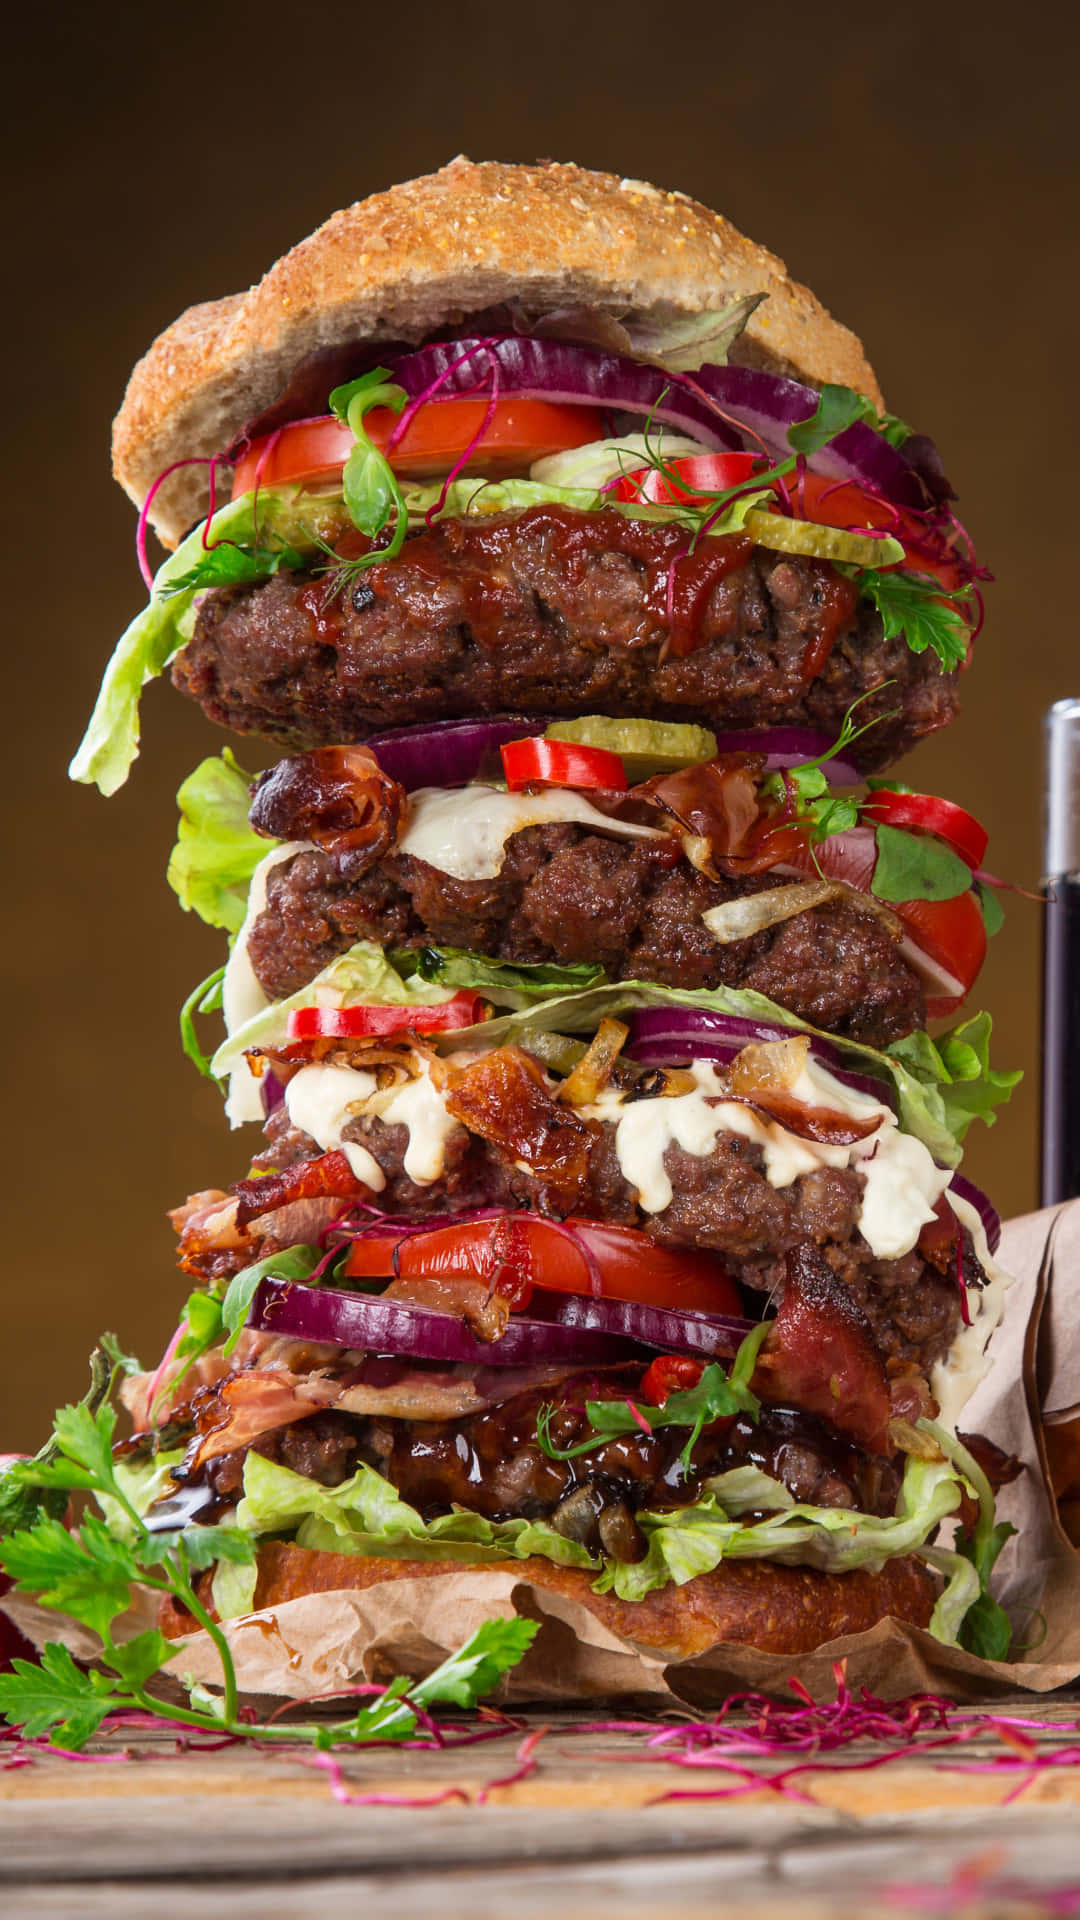 Delicious double cheeseburger overflowing with flavor